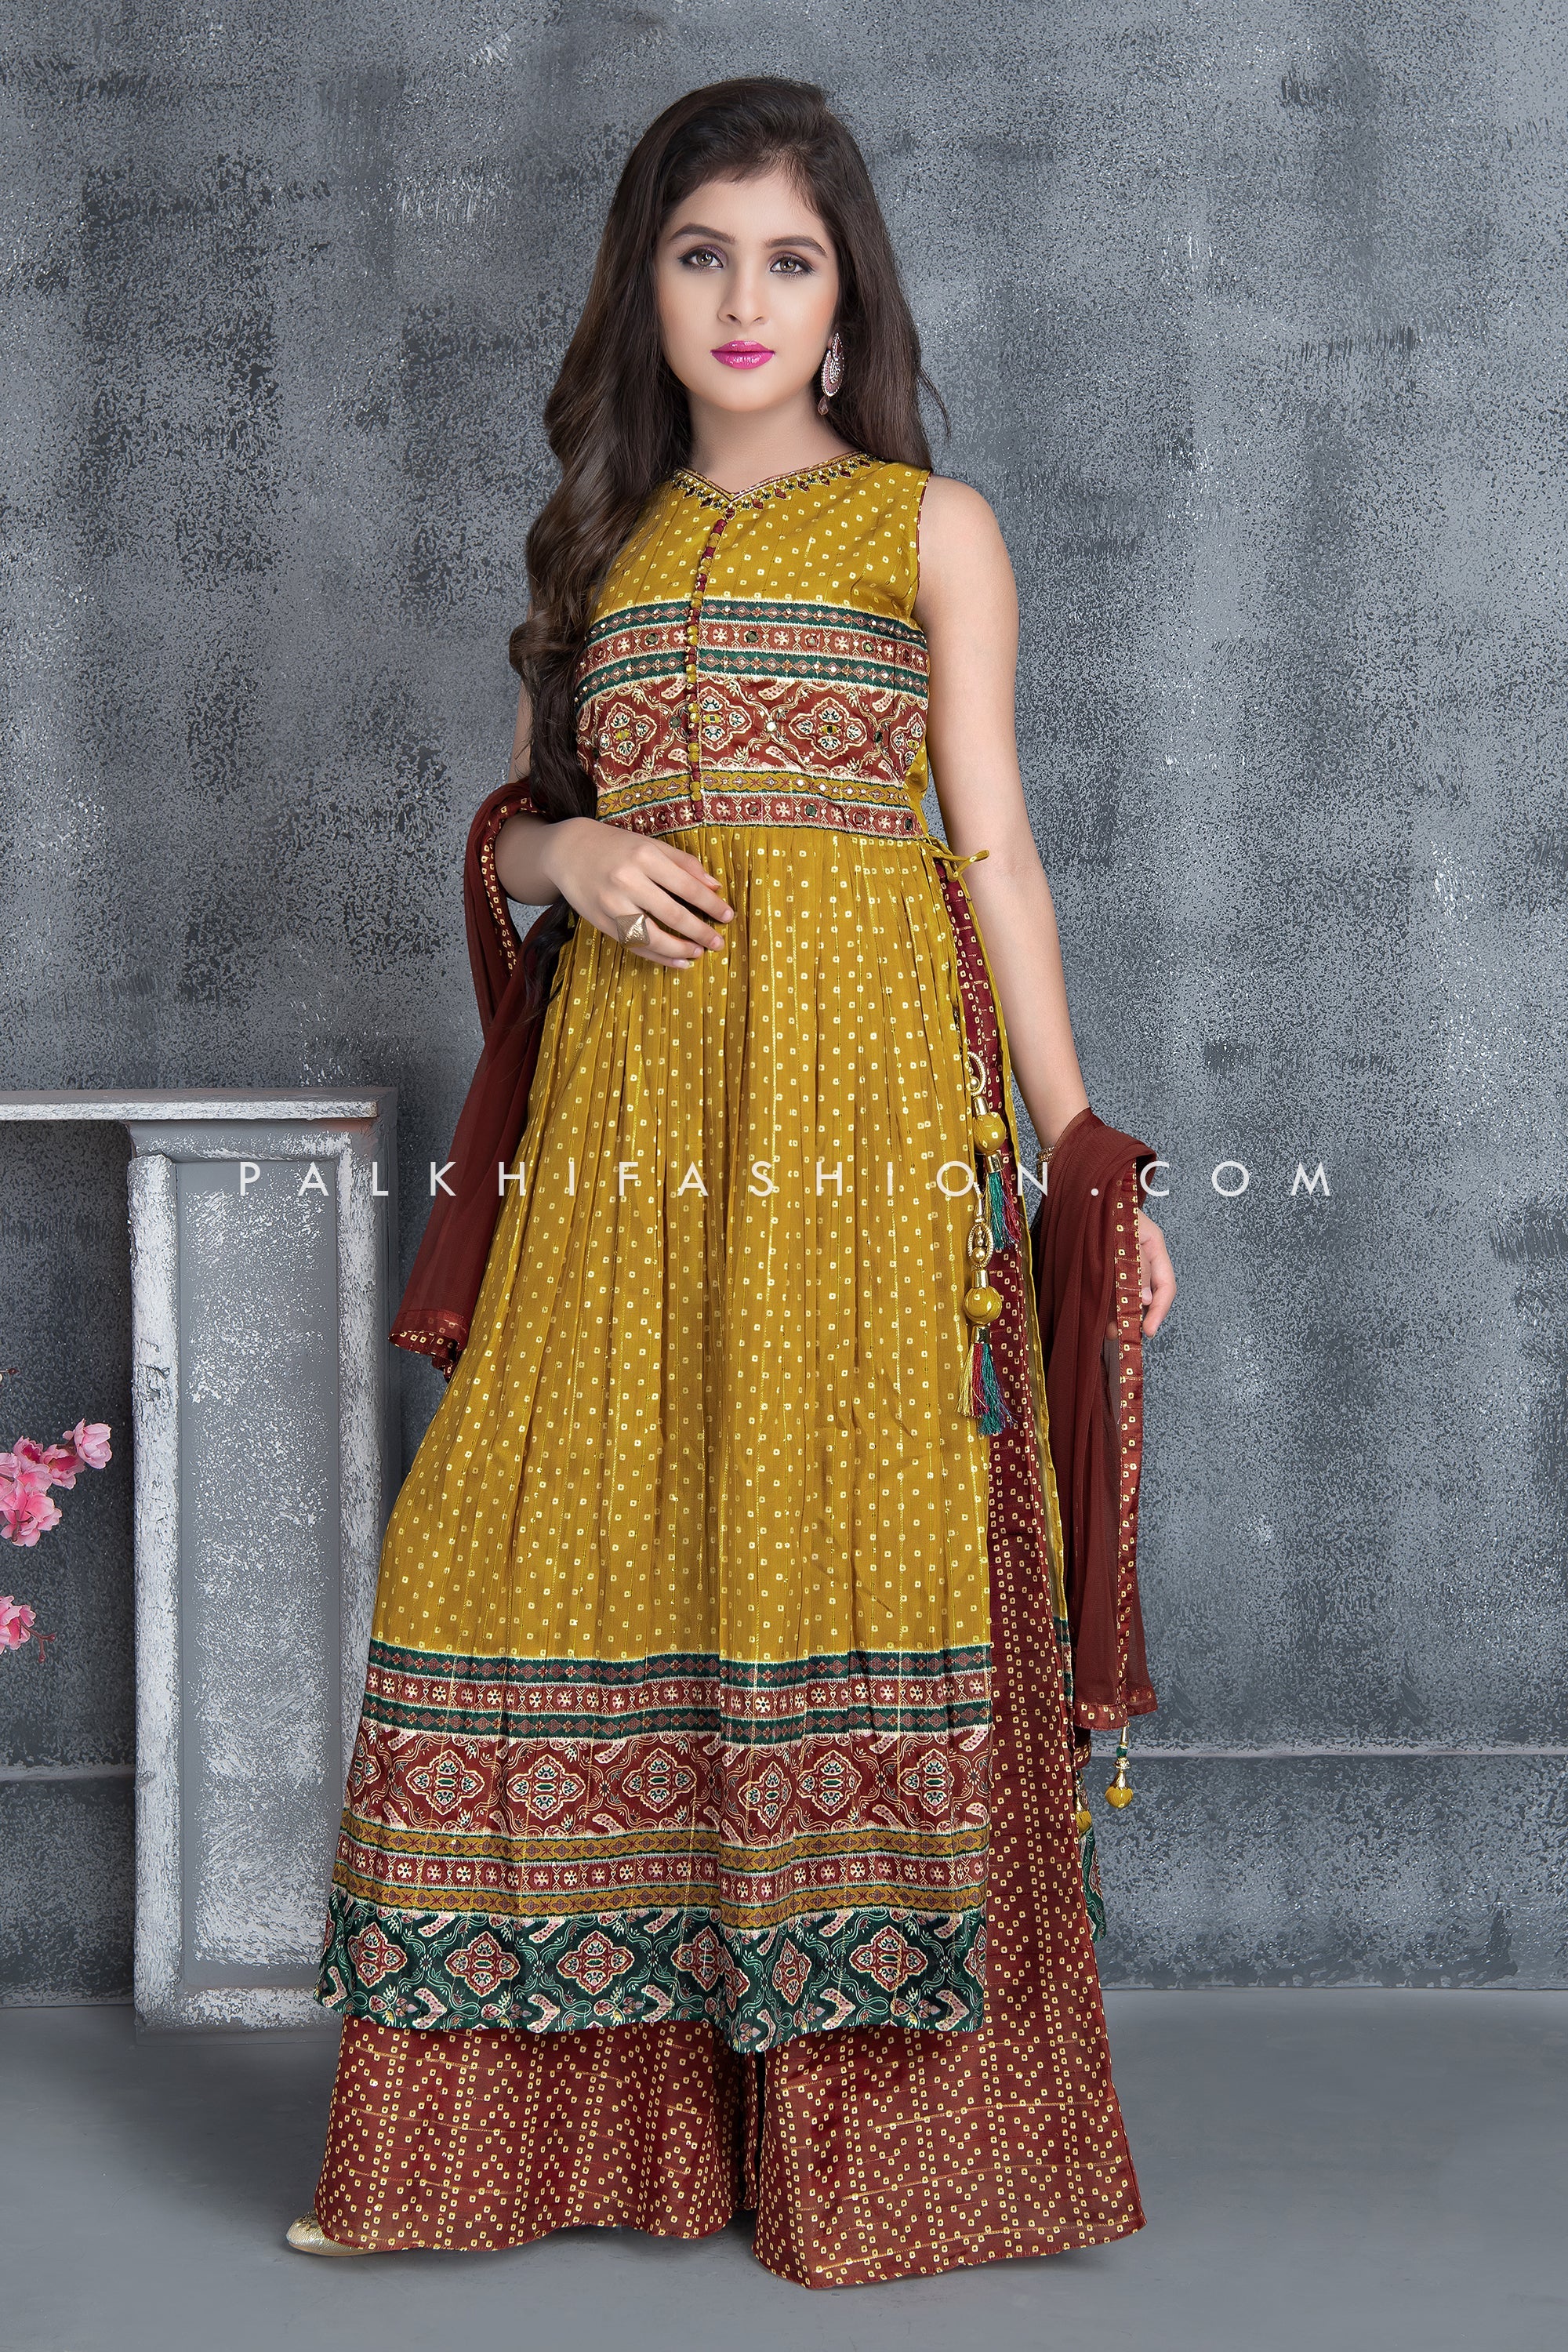 Palkhi Fashion | Indian Clothes Online in USA | Clothing Store Houston |  Indian fashion dresses, Choli dress, Indian designer outfits